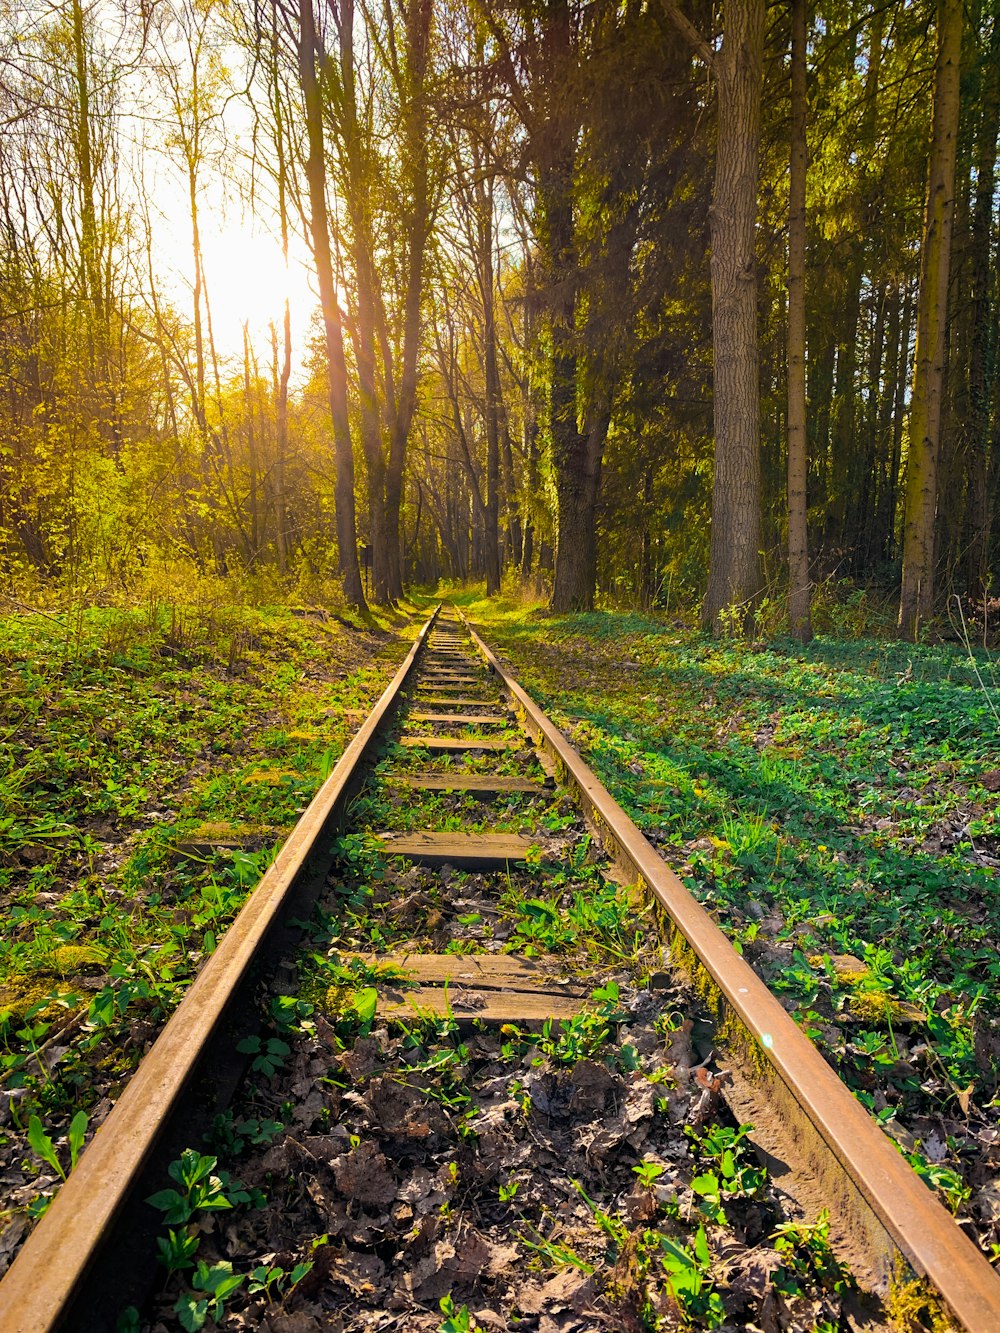 brown train rail in forest during daytime